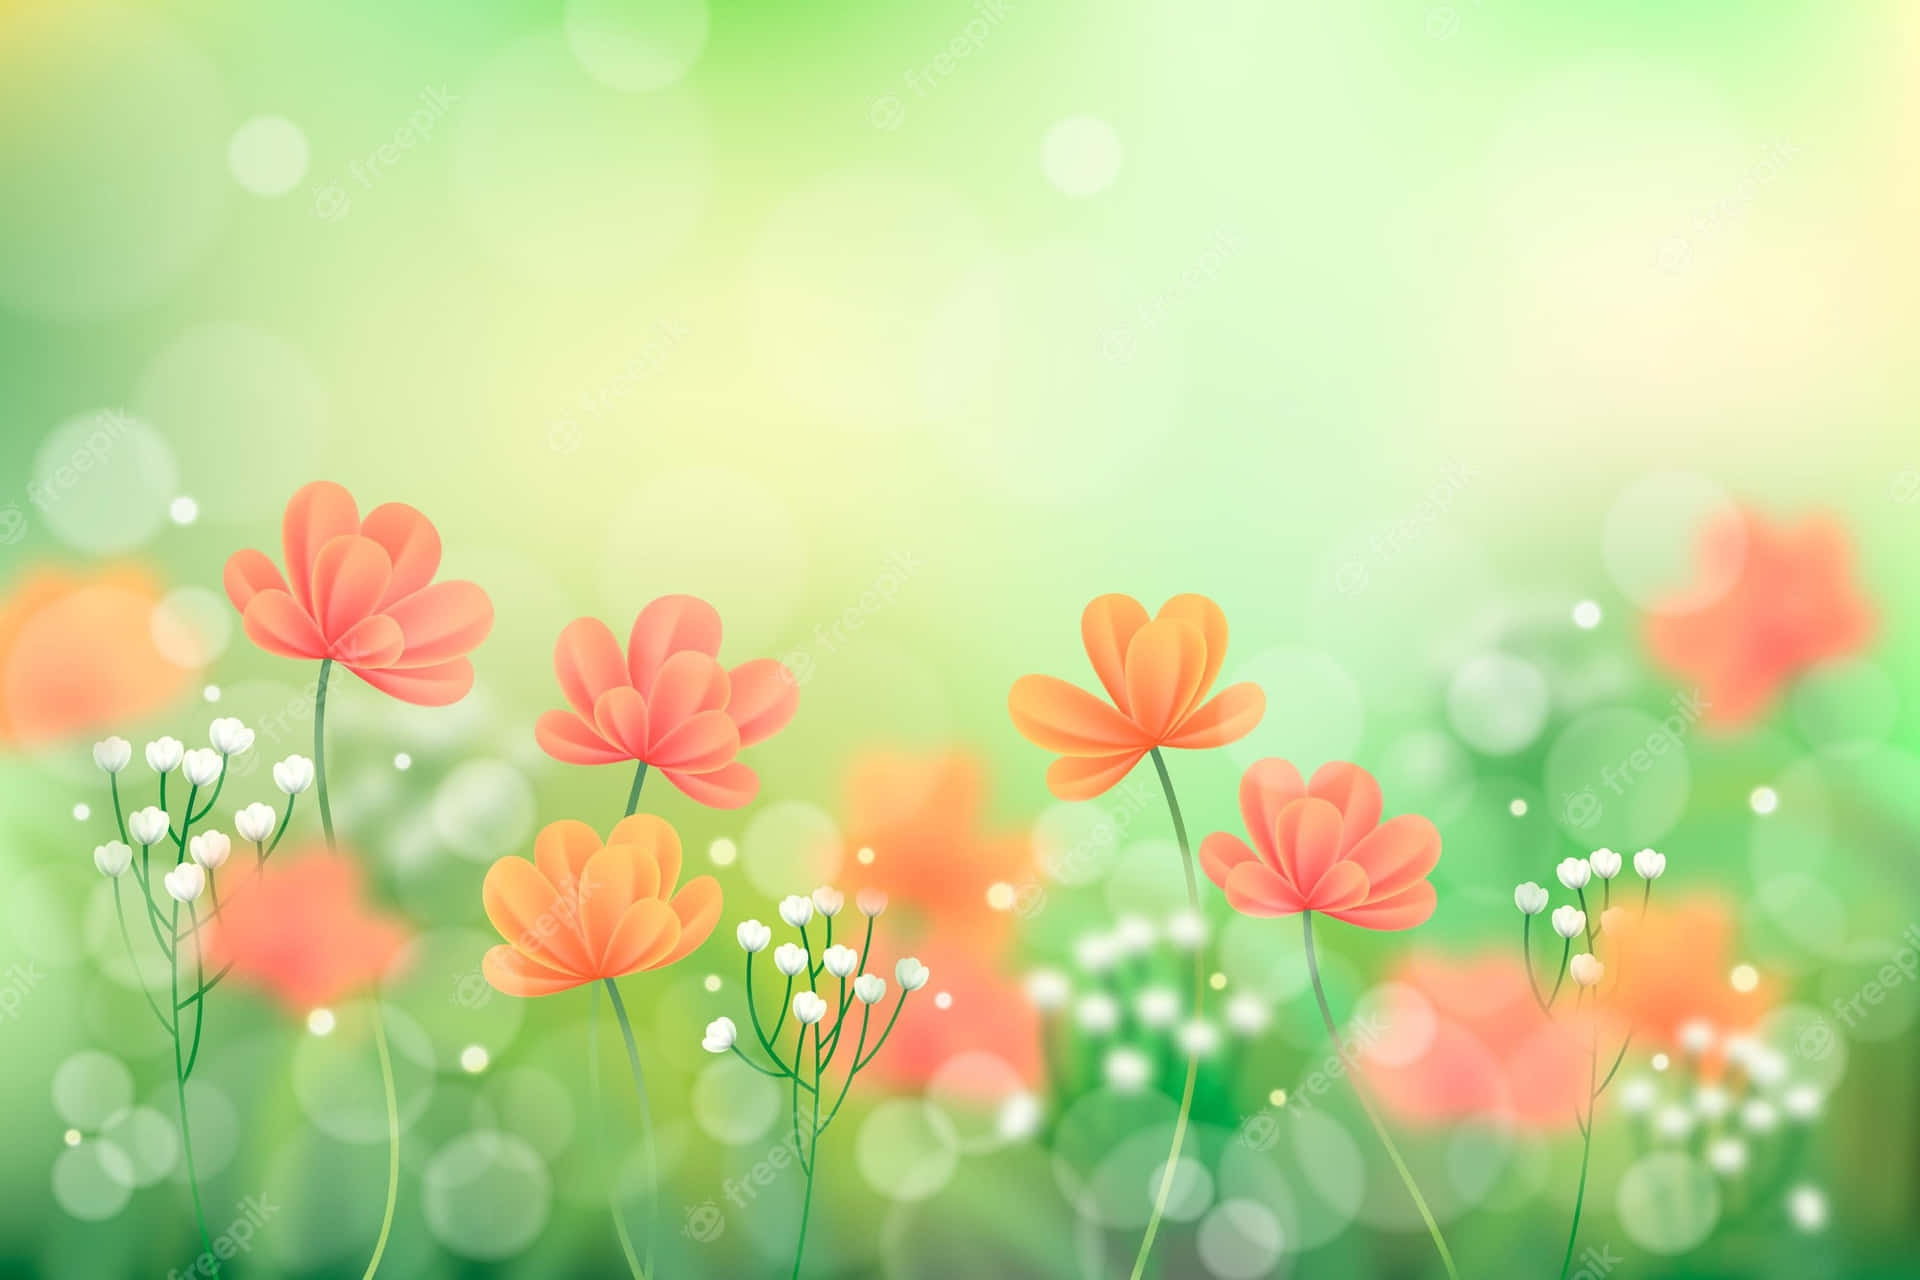 A Colorful Background With Flowers And Bokeh